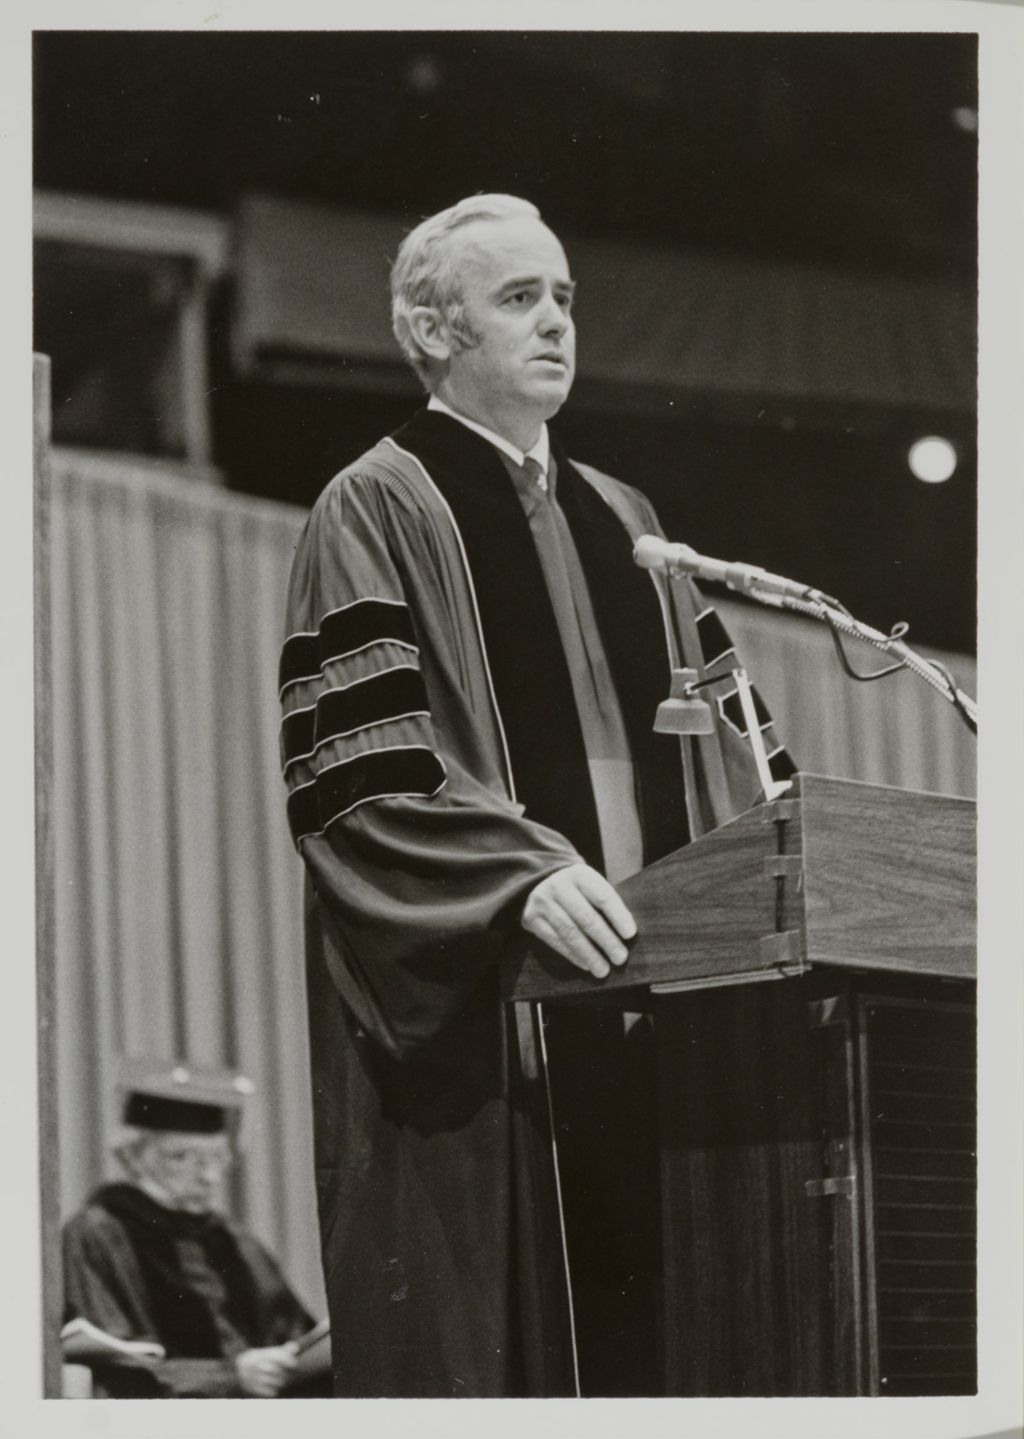 William D. Forsyth, Jr. addressing the audience at the graduation ceremony